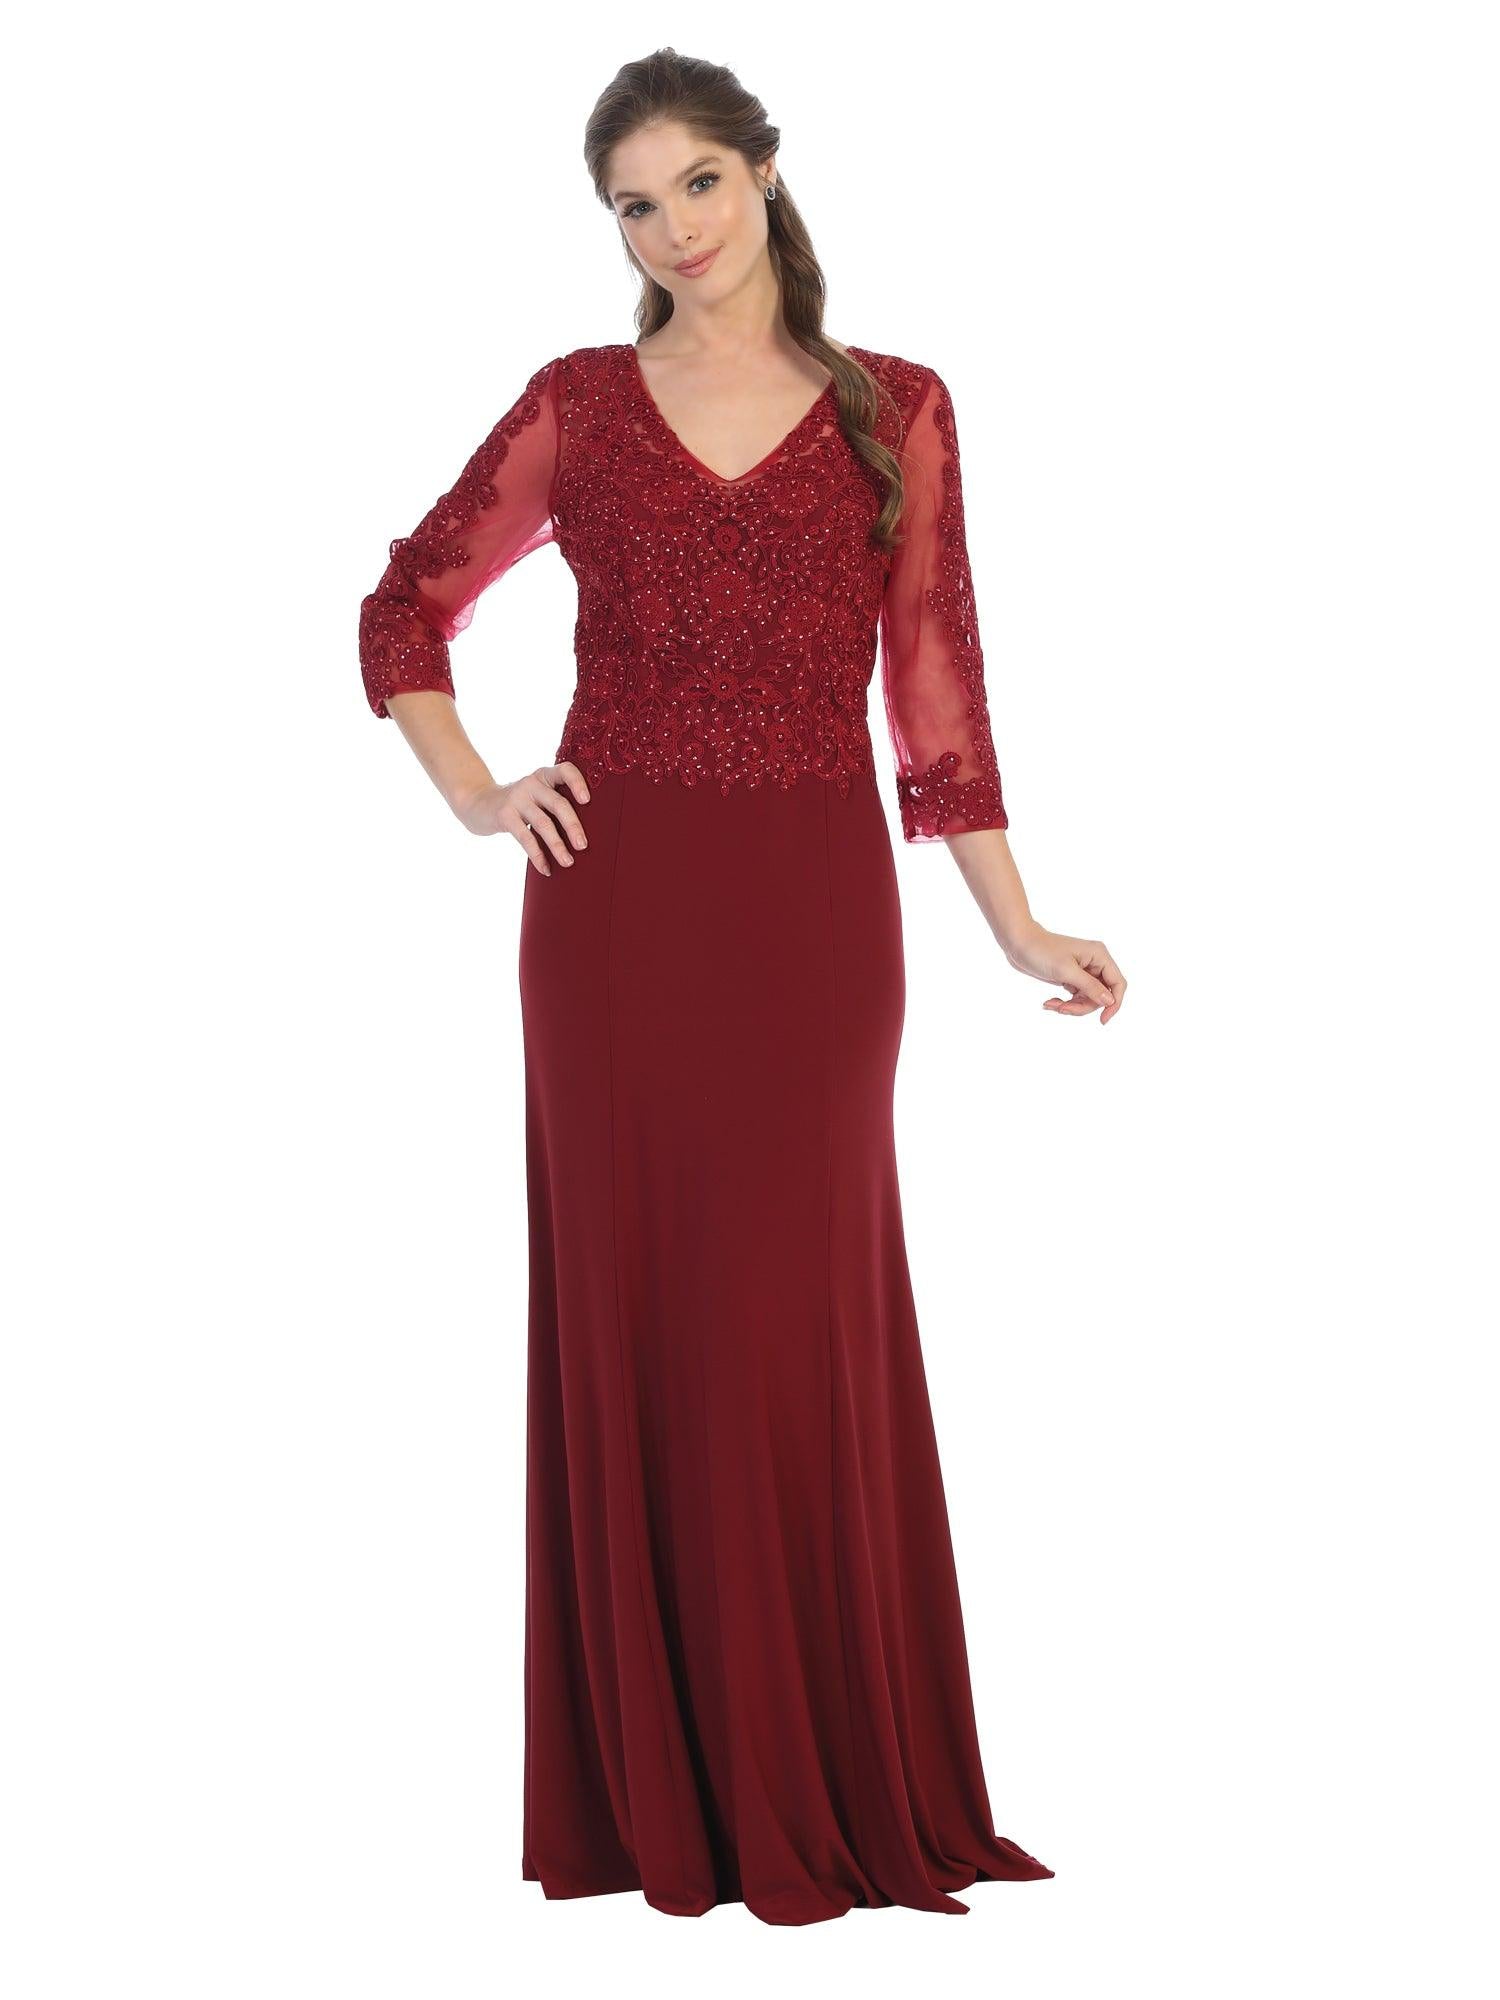 Long Formal 3/4 Sleeve Mother of the Bride Dress - The Dress Outlet